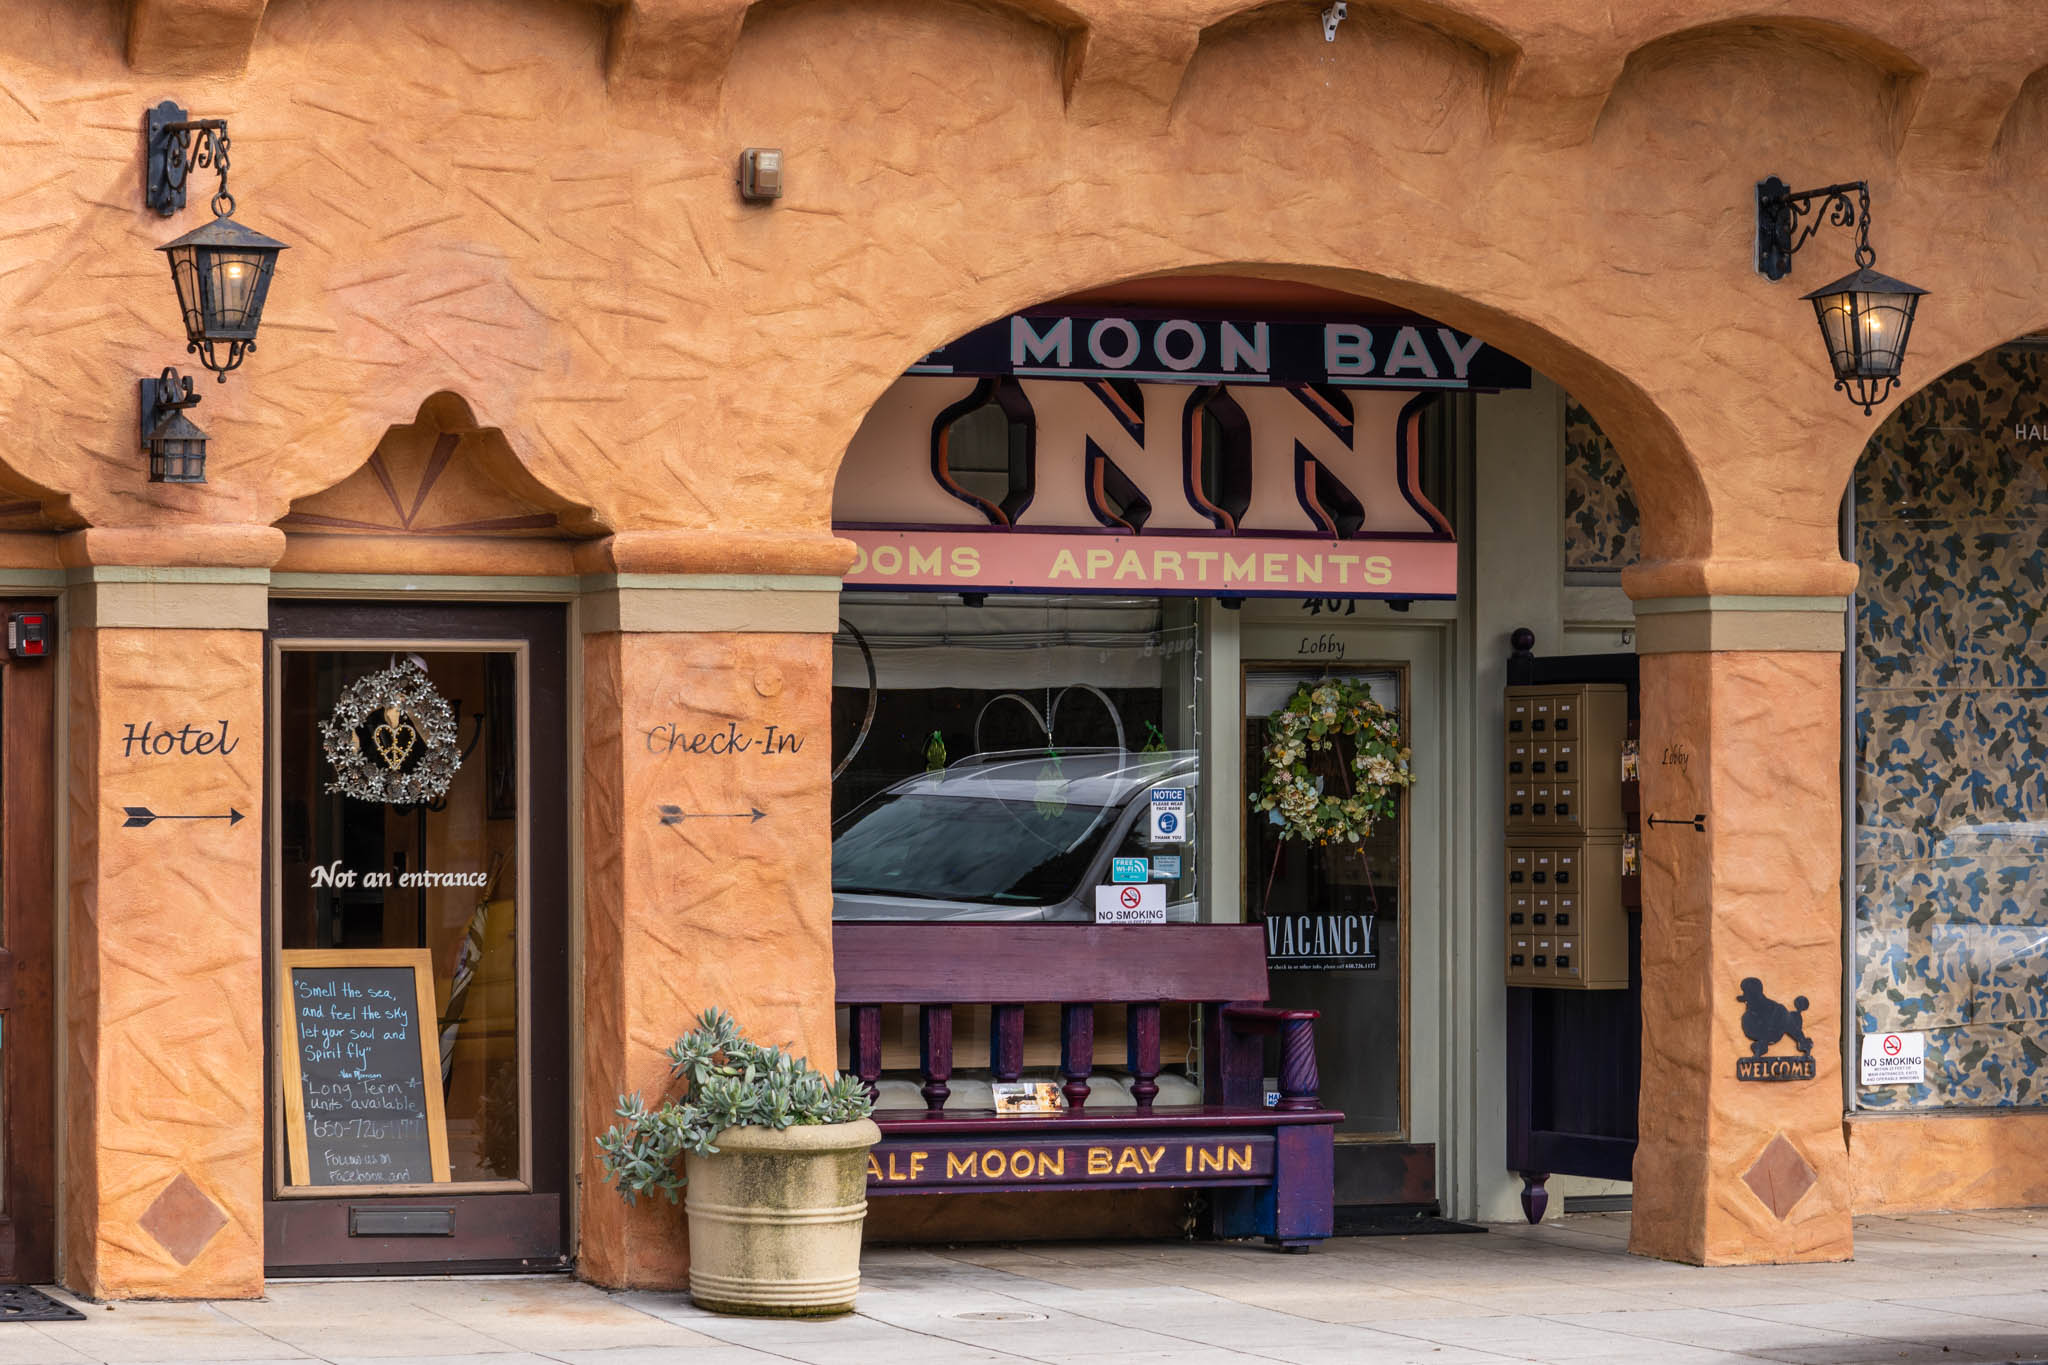 The Half Moon Bay Inn is perfectly situated on Main Street.